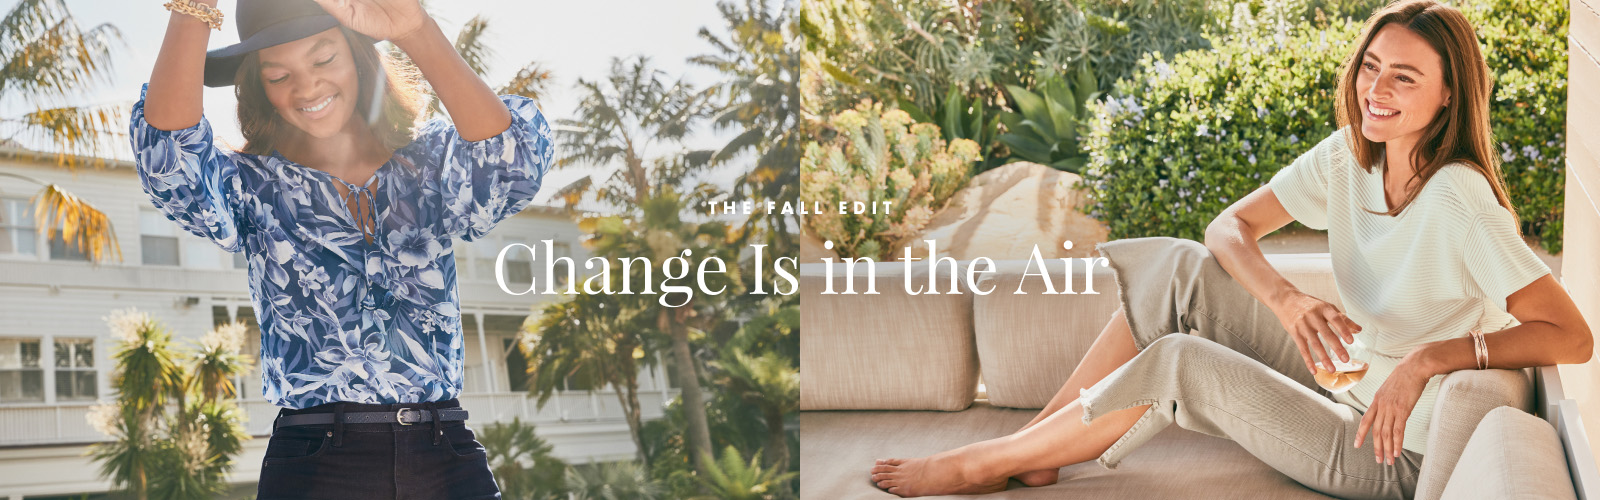 The Fall Edit: Change Is in the Air